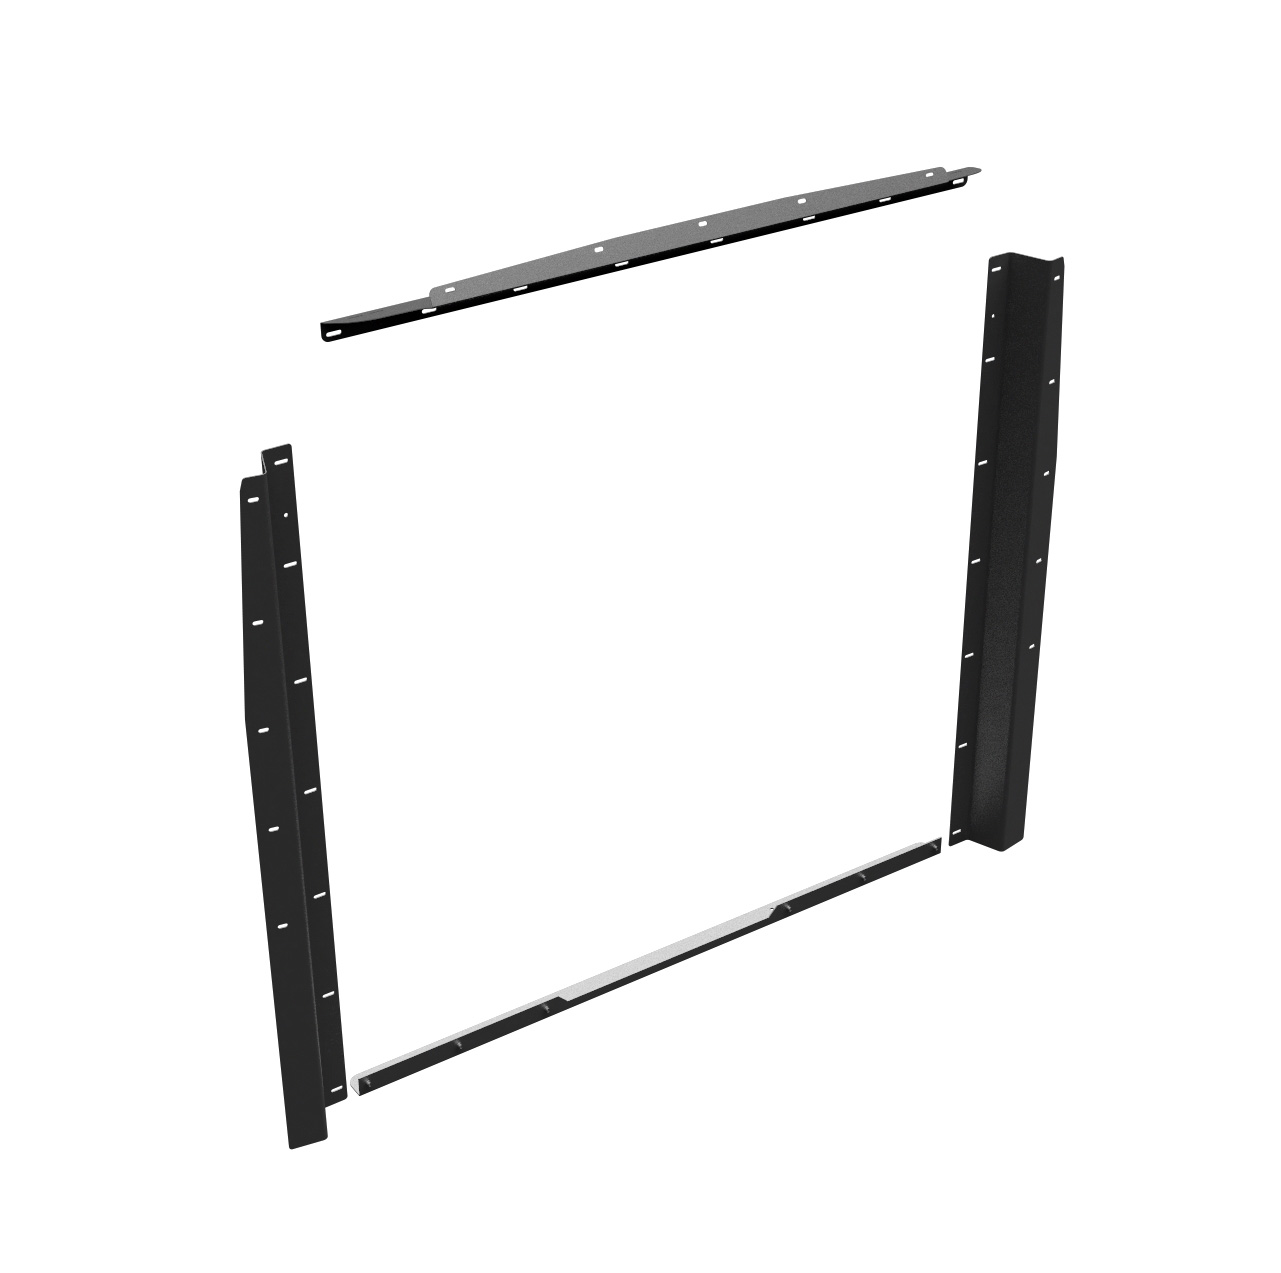 Steel Partition Retro Mounting Kit